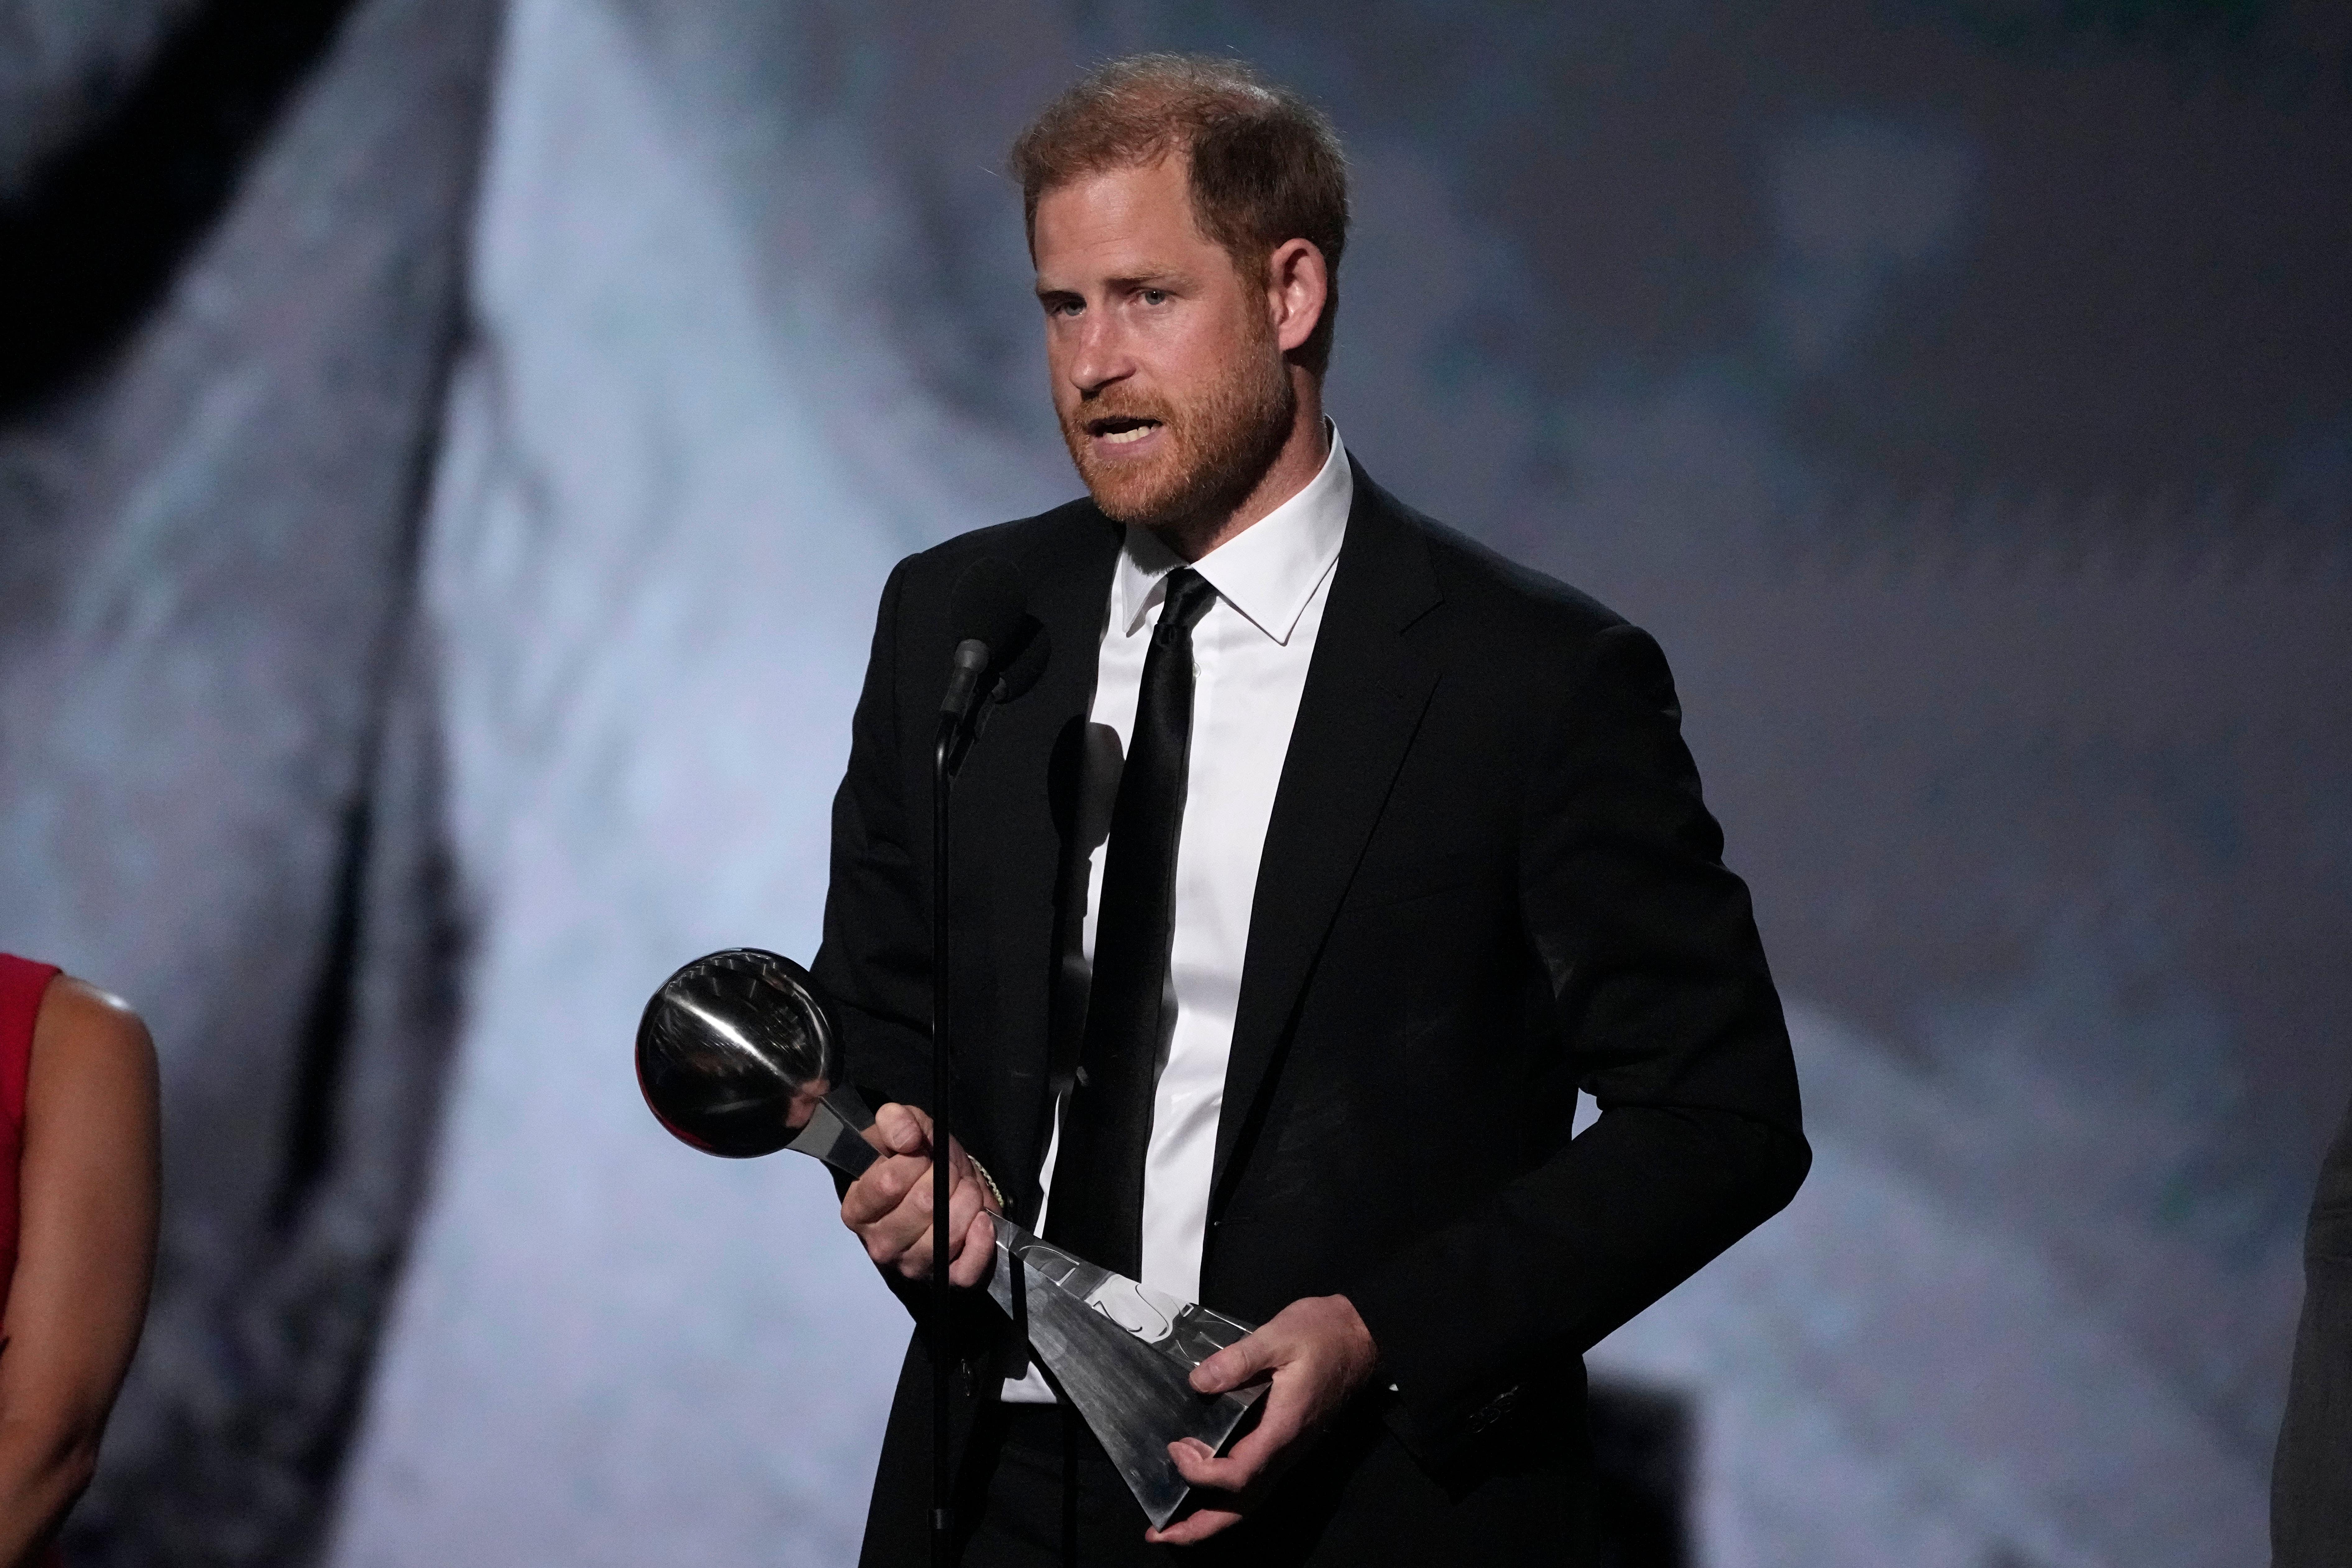 Prince Harry speaks after receiving the Pat Tillman Award For Service at the ESPY Awards.